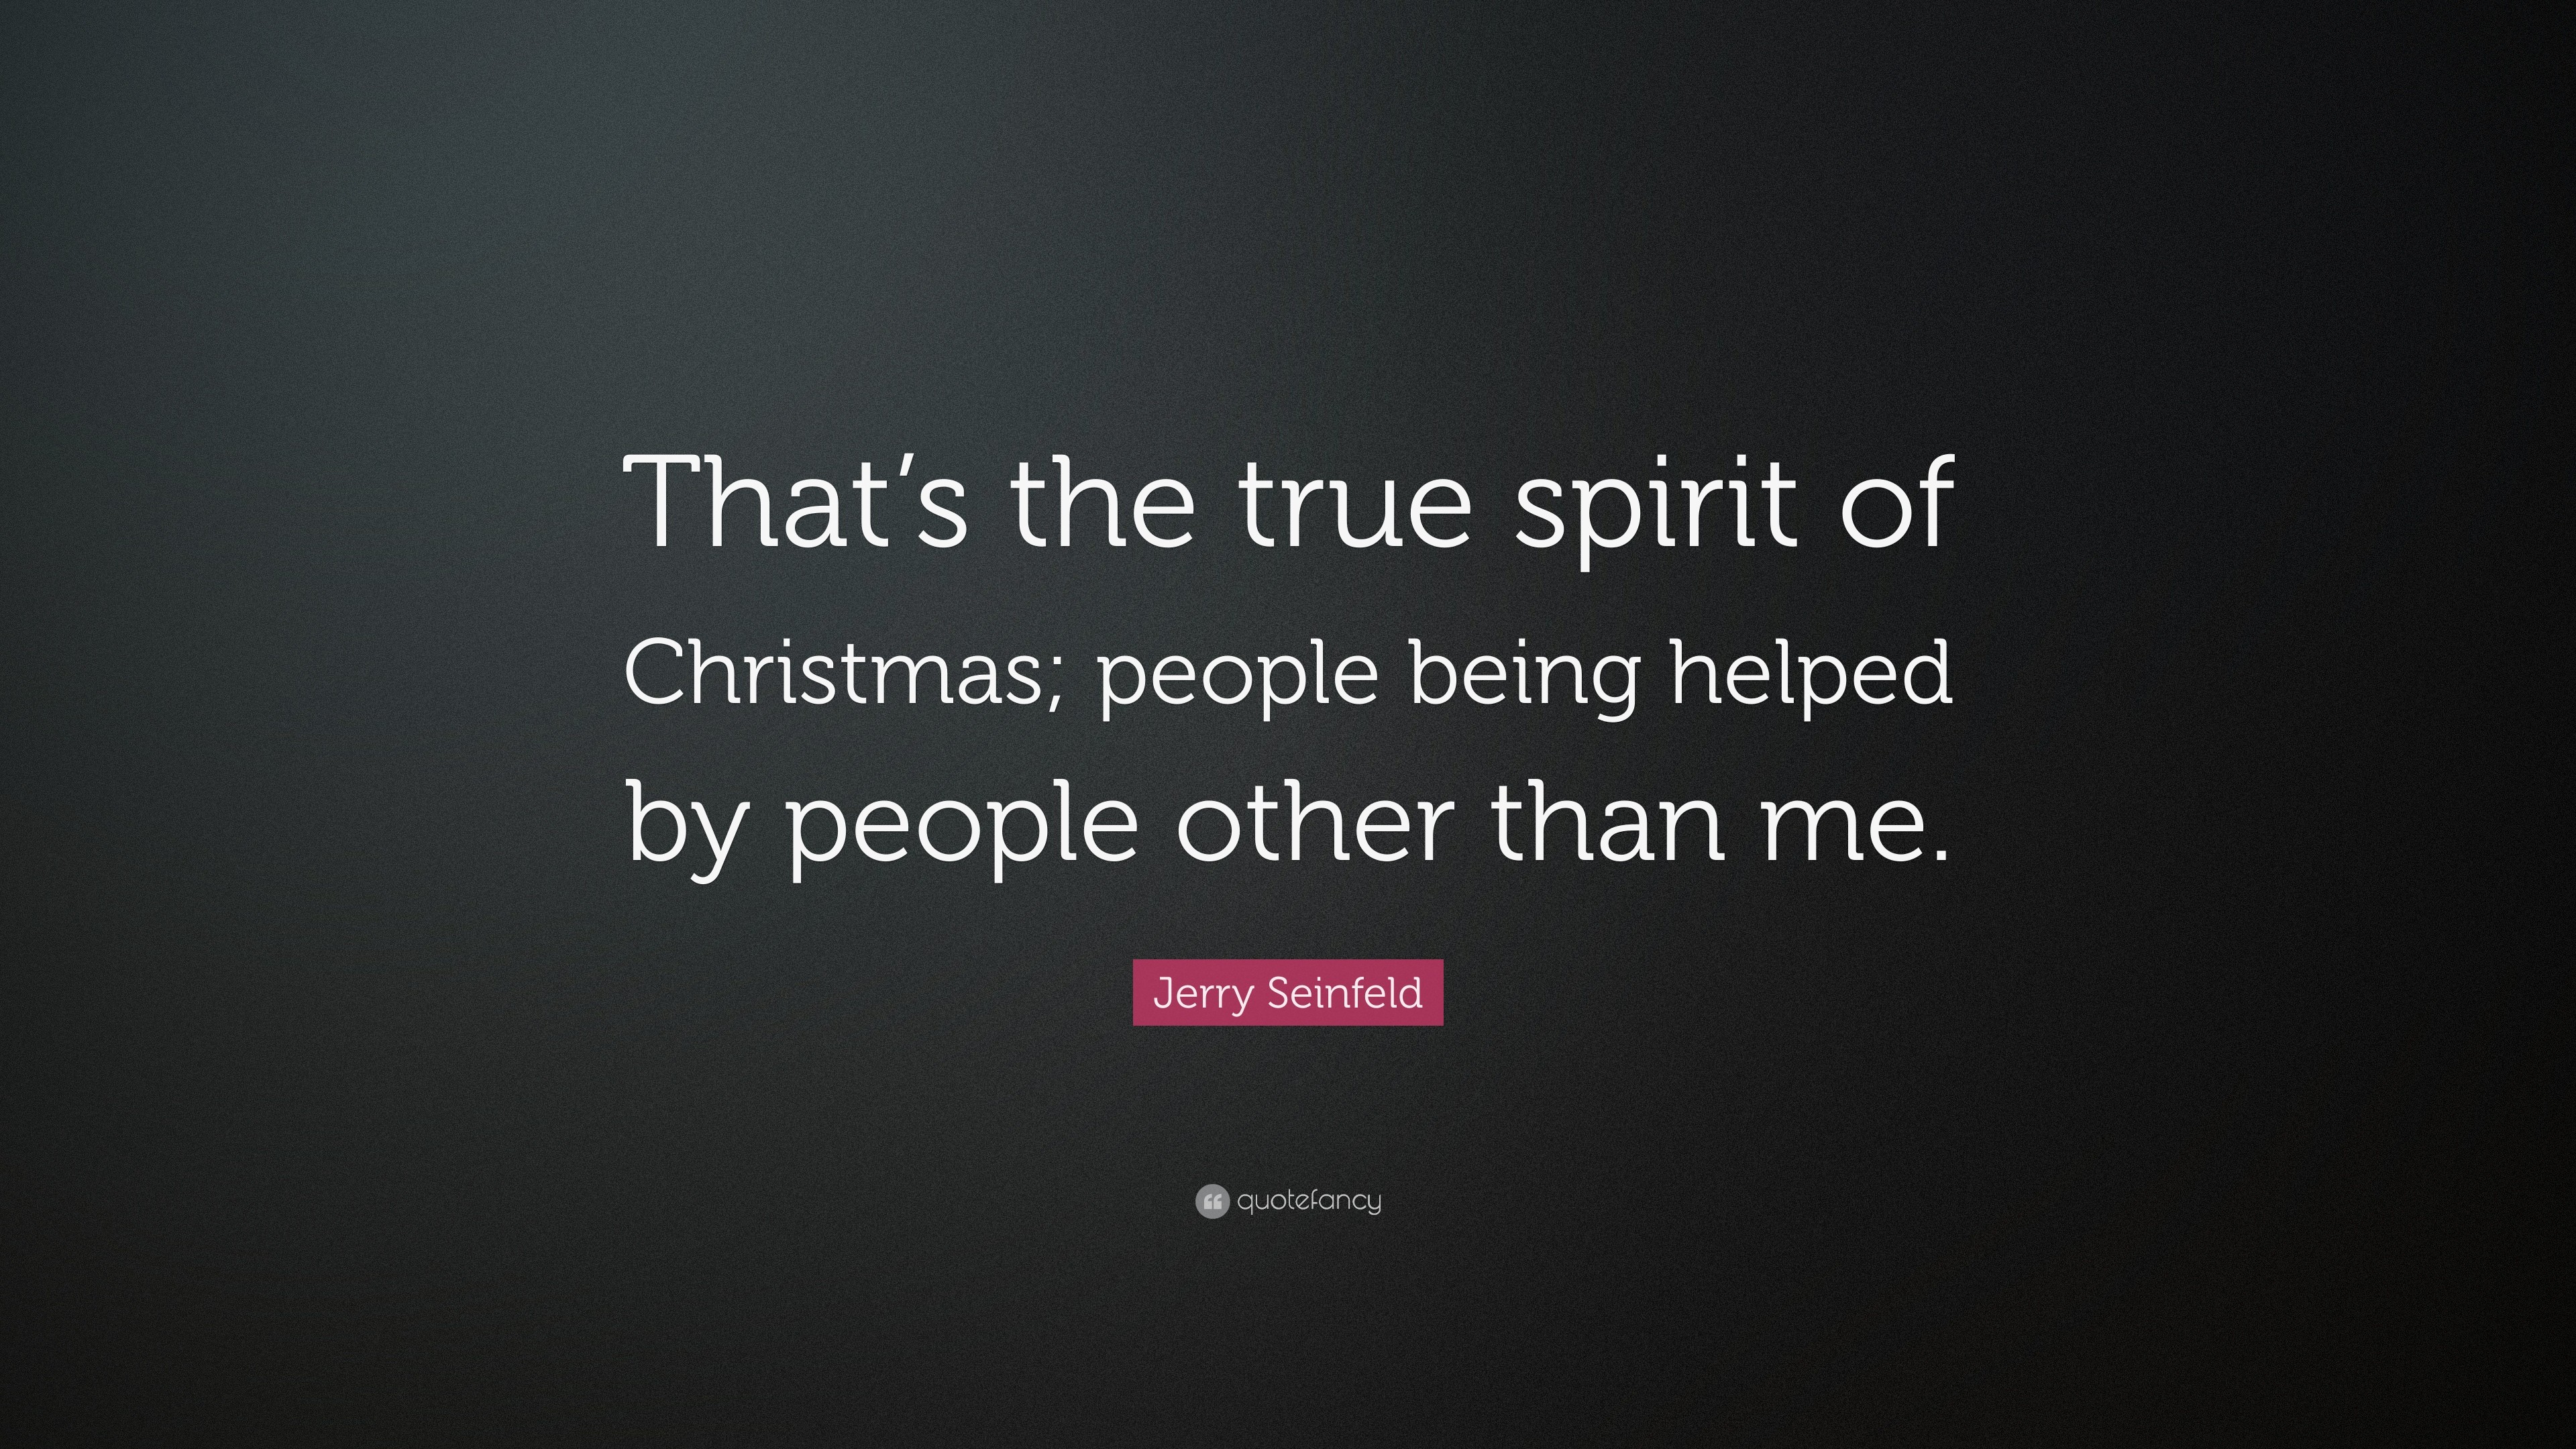 3840x2160 Jerry Seinfeld Quote: “That's the true spirit of Christmas; people being  helped by